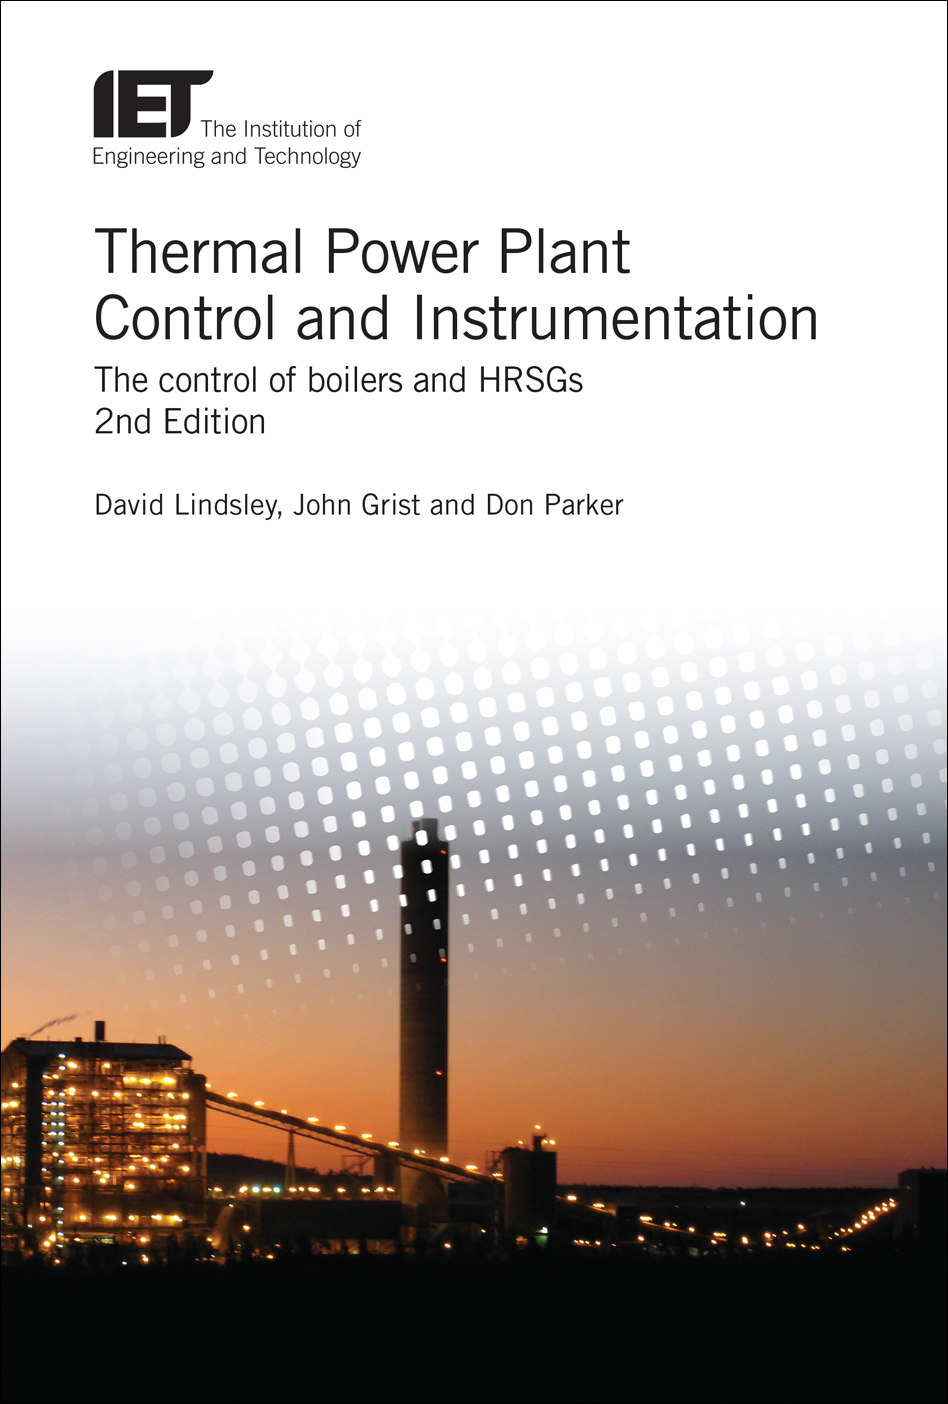 Thermal Power Plant Control and Instrumentation, The control of boilers and HRSGs, 2nd Edition